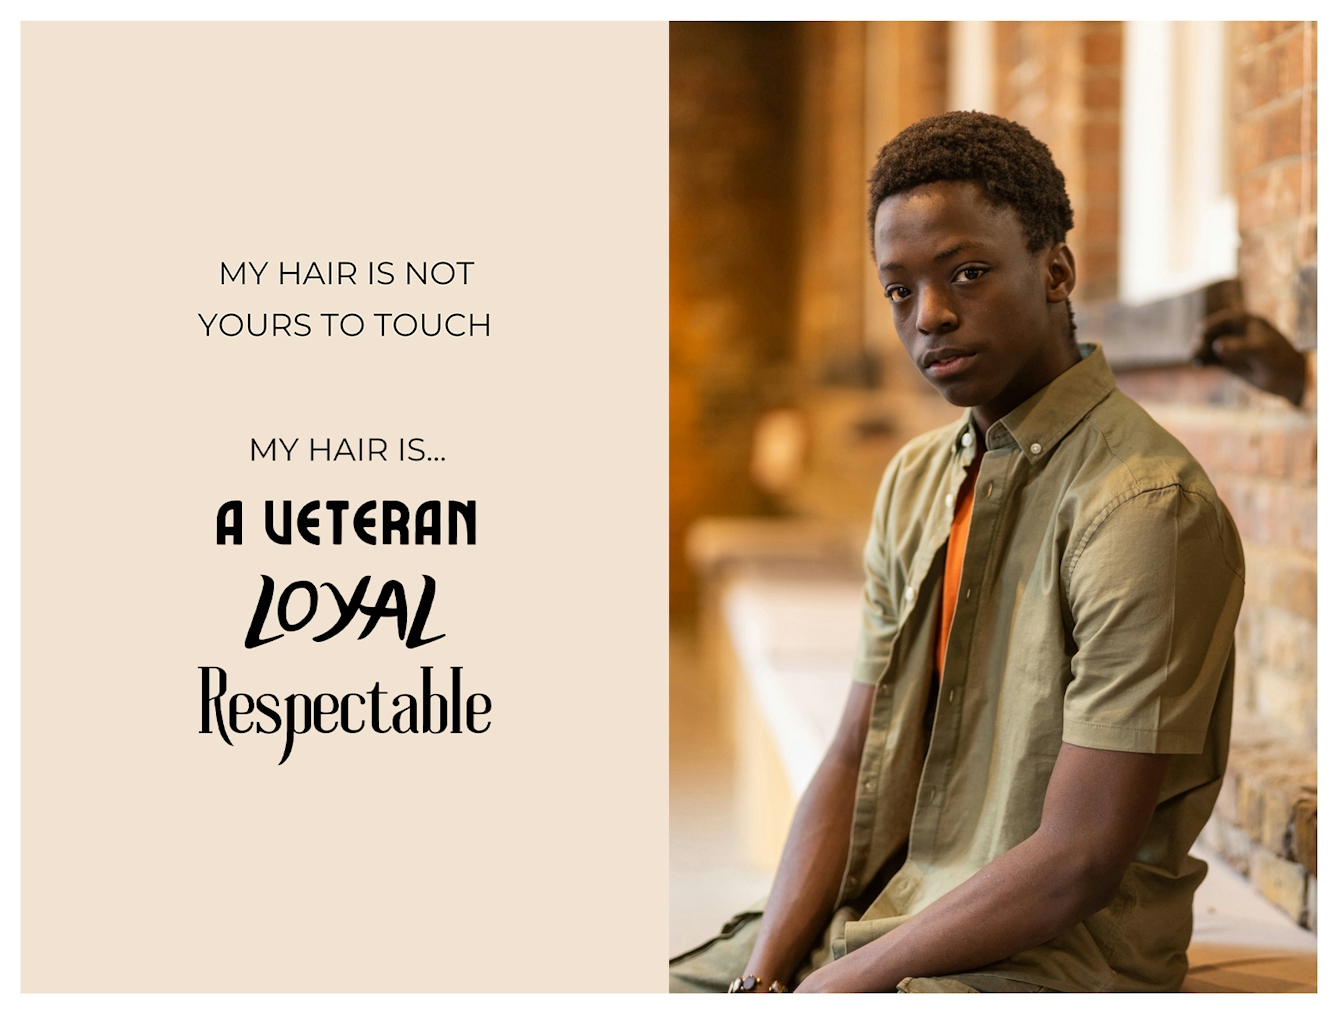 Photographic portrait and graphic design laid out next to each other. On the right is a portrait of a young Black man from the waist up. He has a short afro and is looking to camera with a relaxed neutral expression. The graphic to the left has a beige background on which are the words 'My hair is not yours to touch. My hair is...a veteran, loyal, respectable'. These last three words are each in a different font to emphasise their meaning.